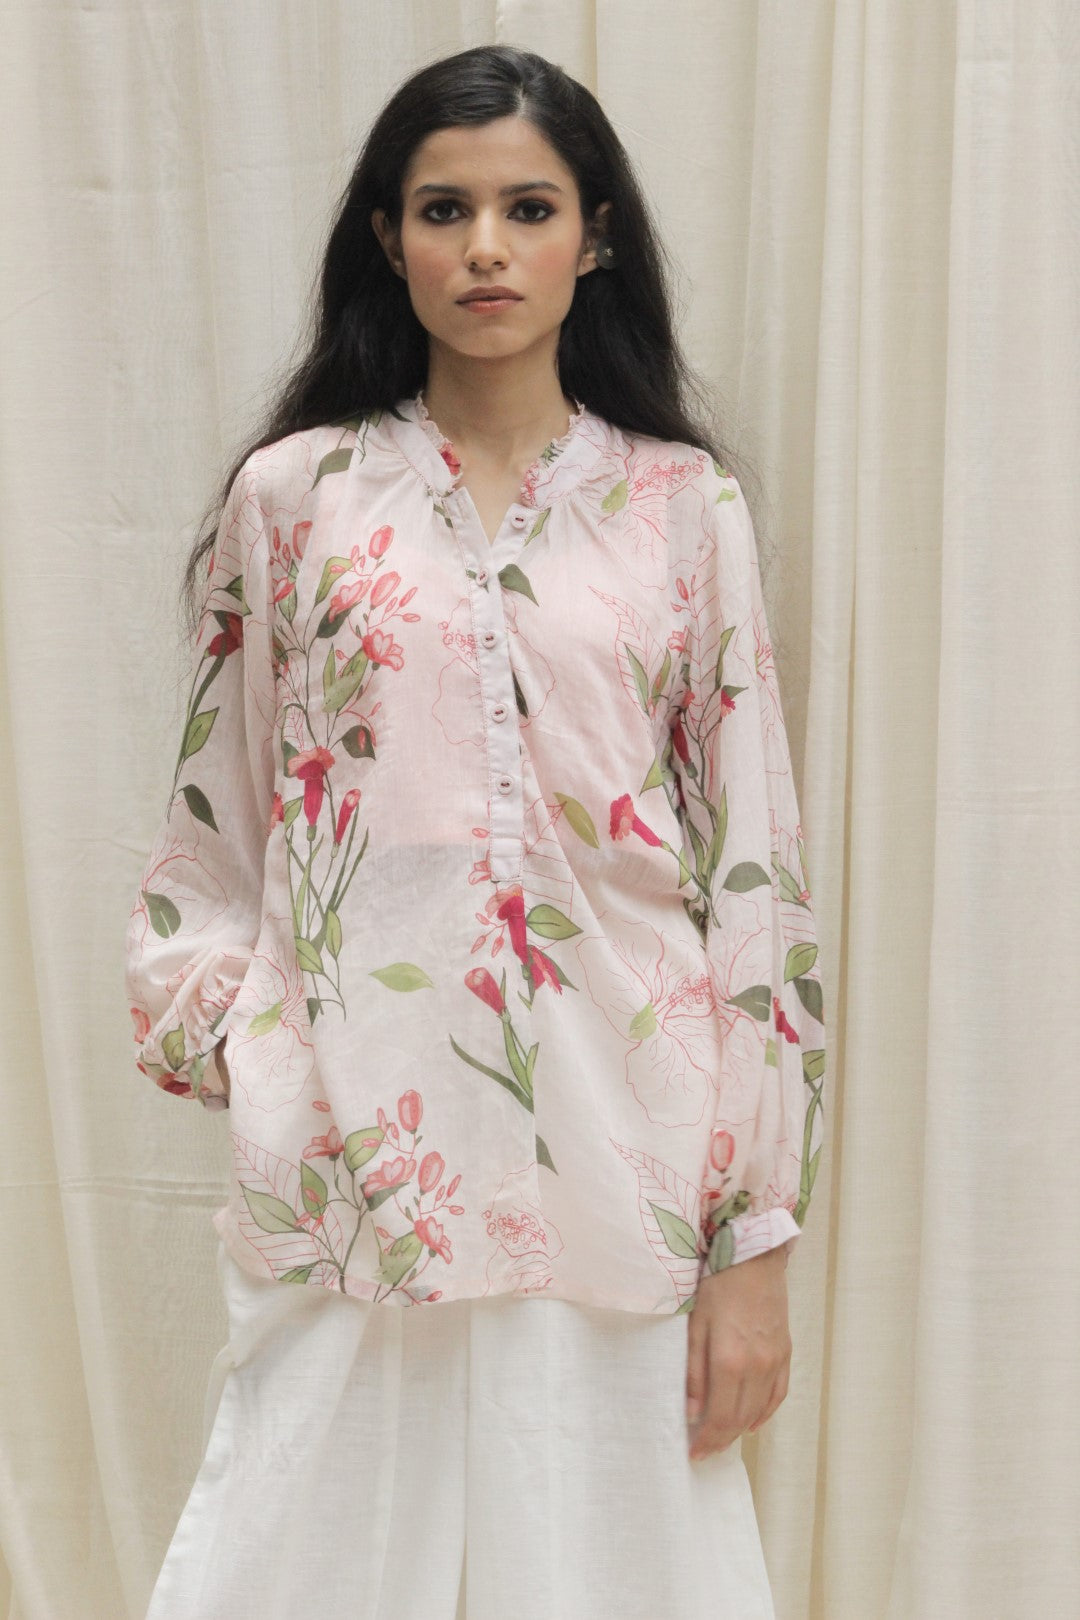 BABY PINK COTTON PRINTED TULIP SHIRT WHITE COTTON CROPPED BOAT PANTS